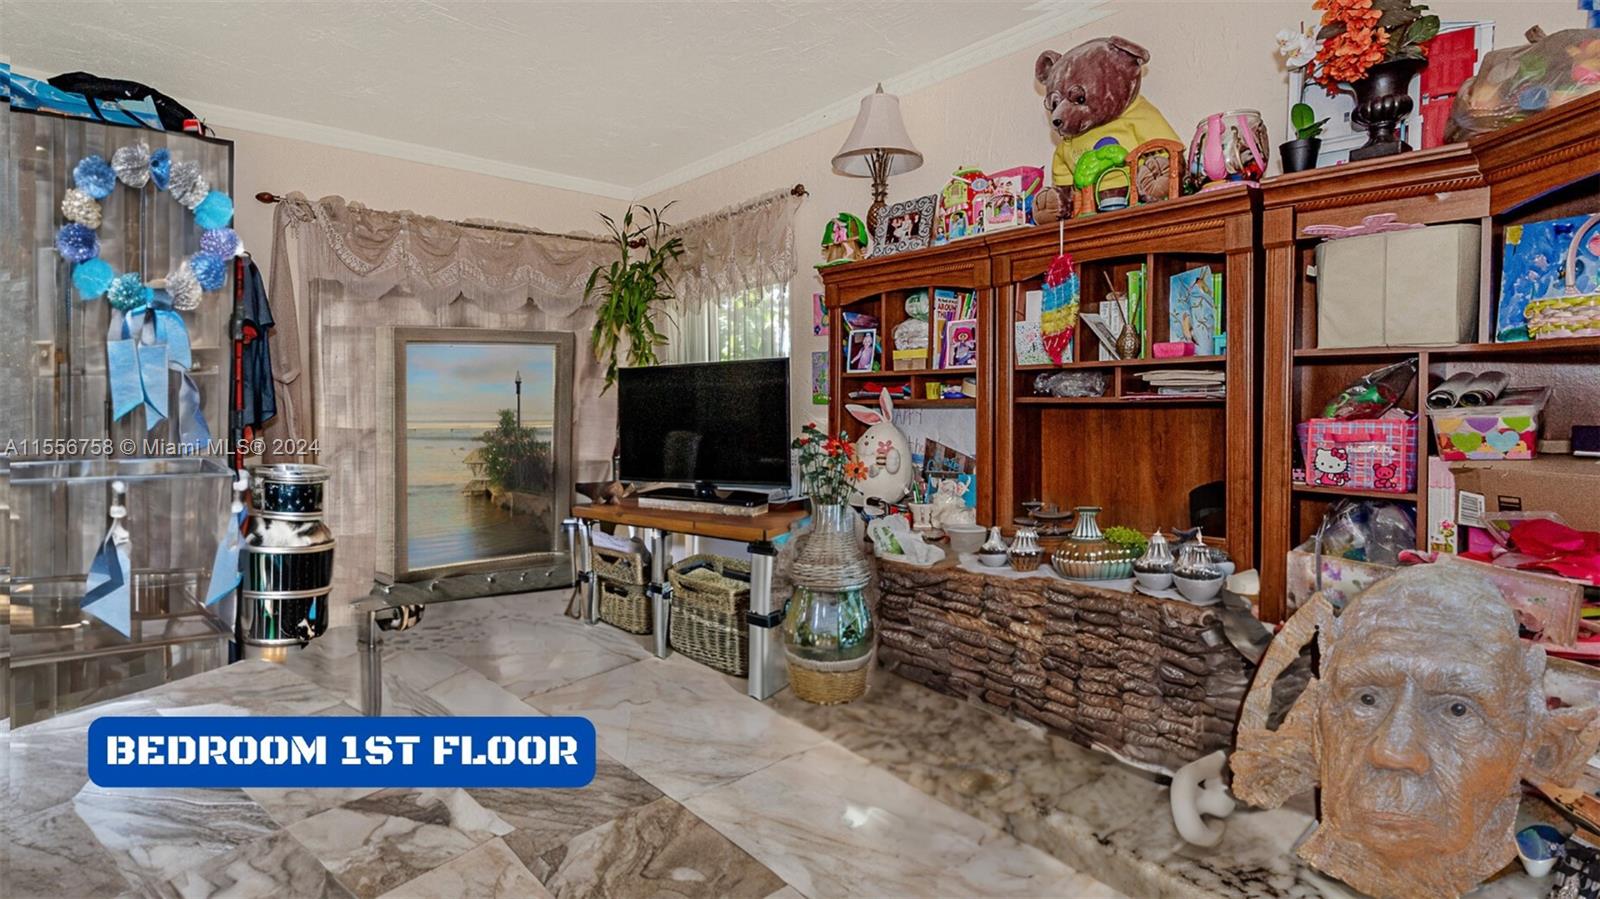 430 Poinciana Dr 1710, Sunny Isles Beach, Florida 33160, 5 Bedrooms Bedrooms, ,3 BathroomsBathrooms,Residential,For Sale,430 Poinciana Dr 1710,A11556758